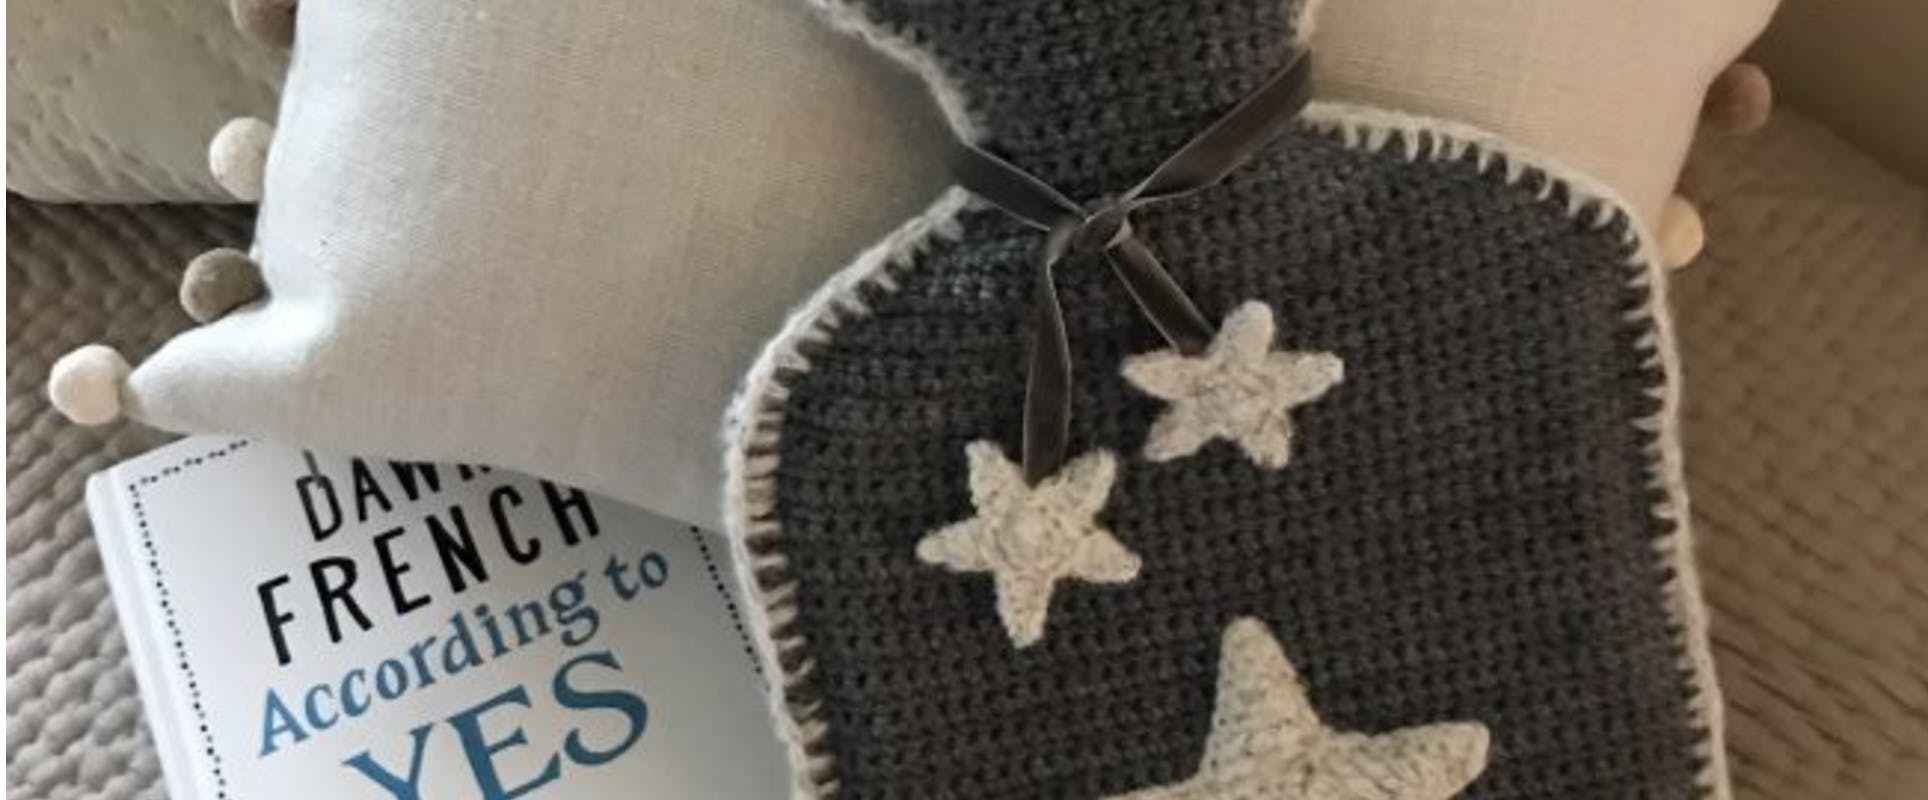 Free Hot Water Bottle Cover Crochet Pattern - [Full Guide with Photos]